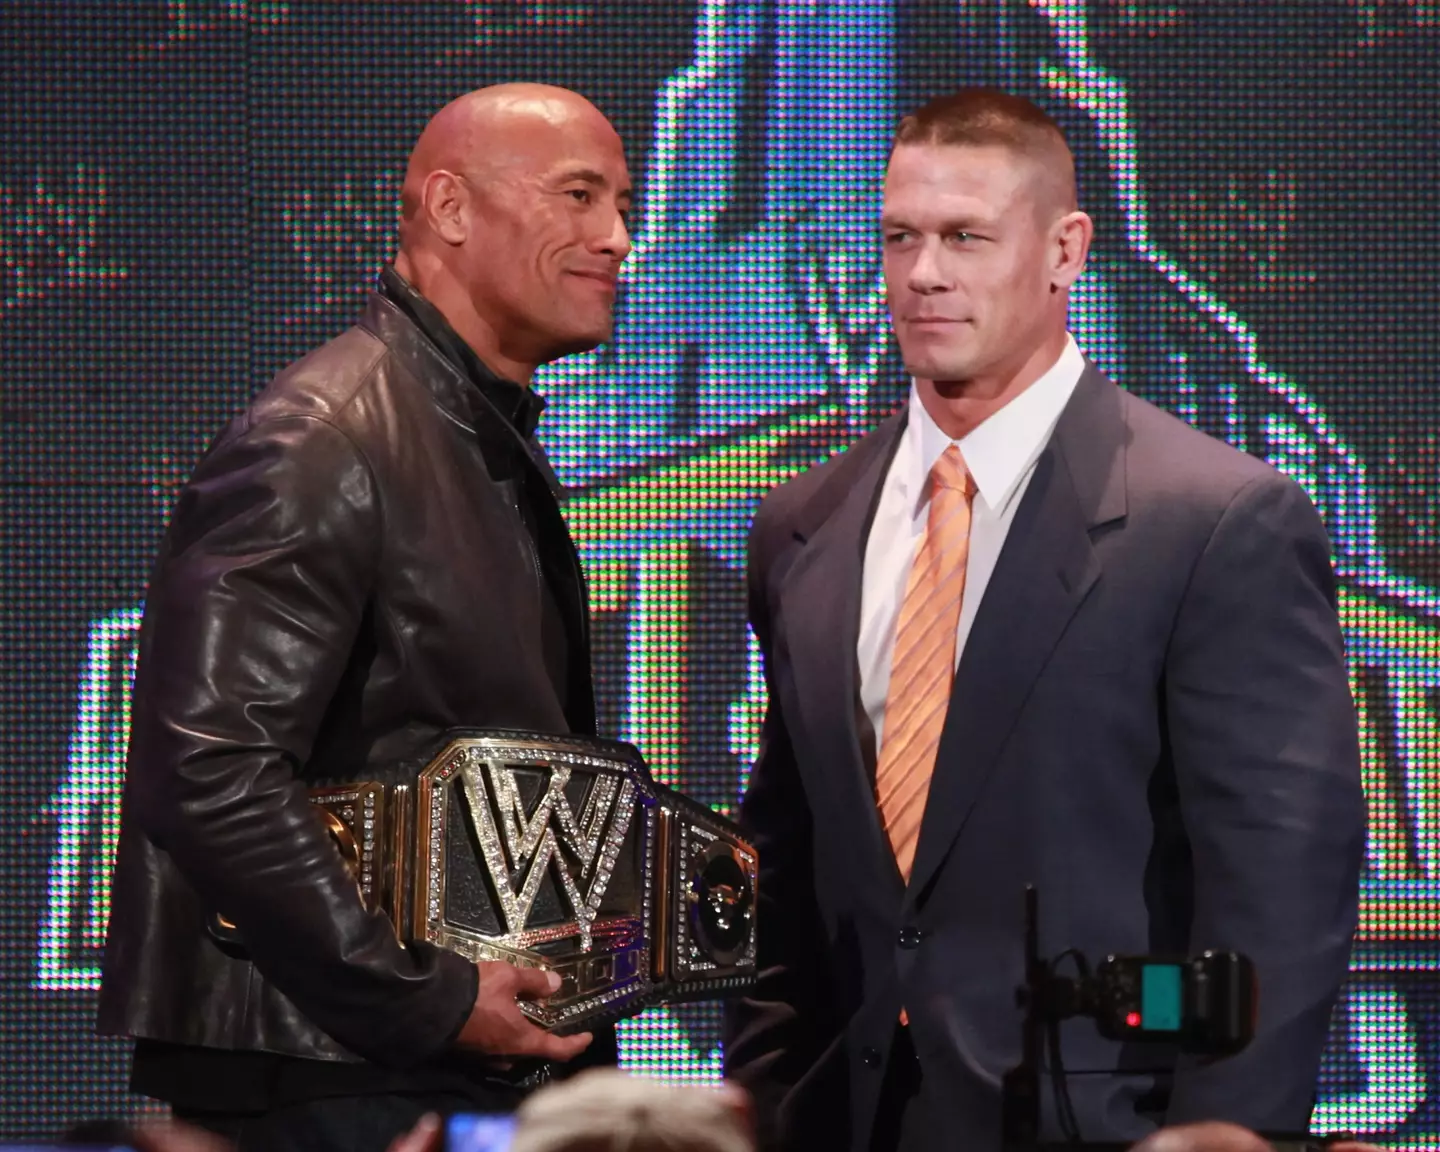 John Cena and The Rock have certainly had some beef over the years.